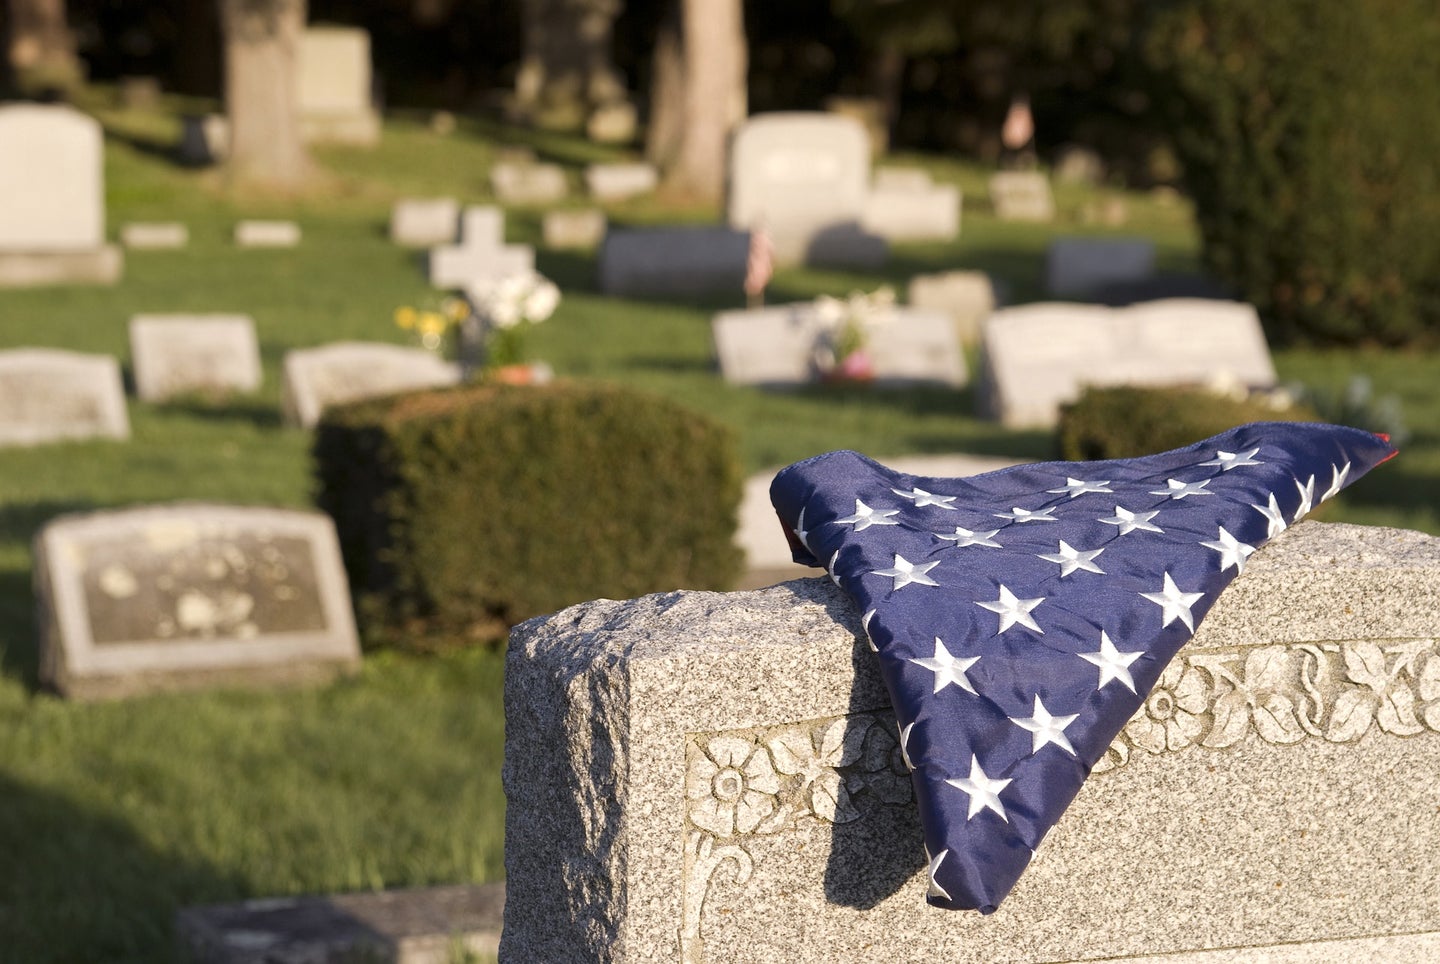 A folded American flag rests on top of a grave stone, with other gravestones in the background.